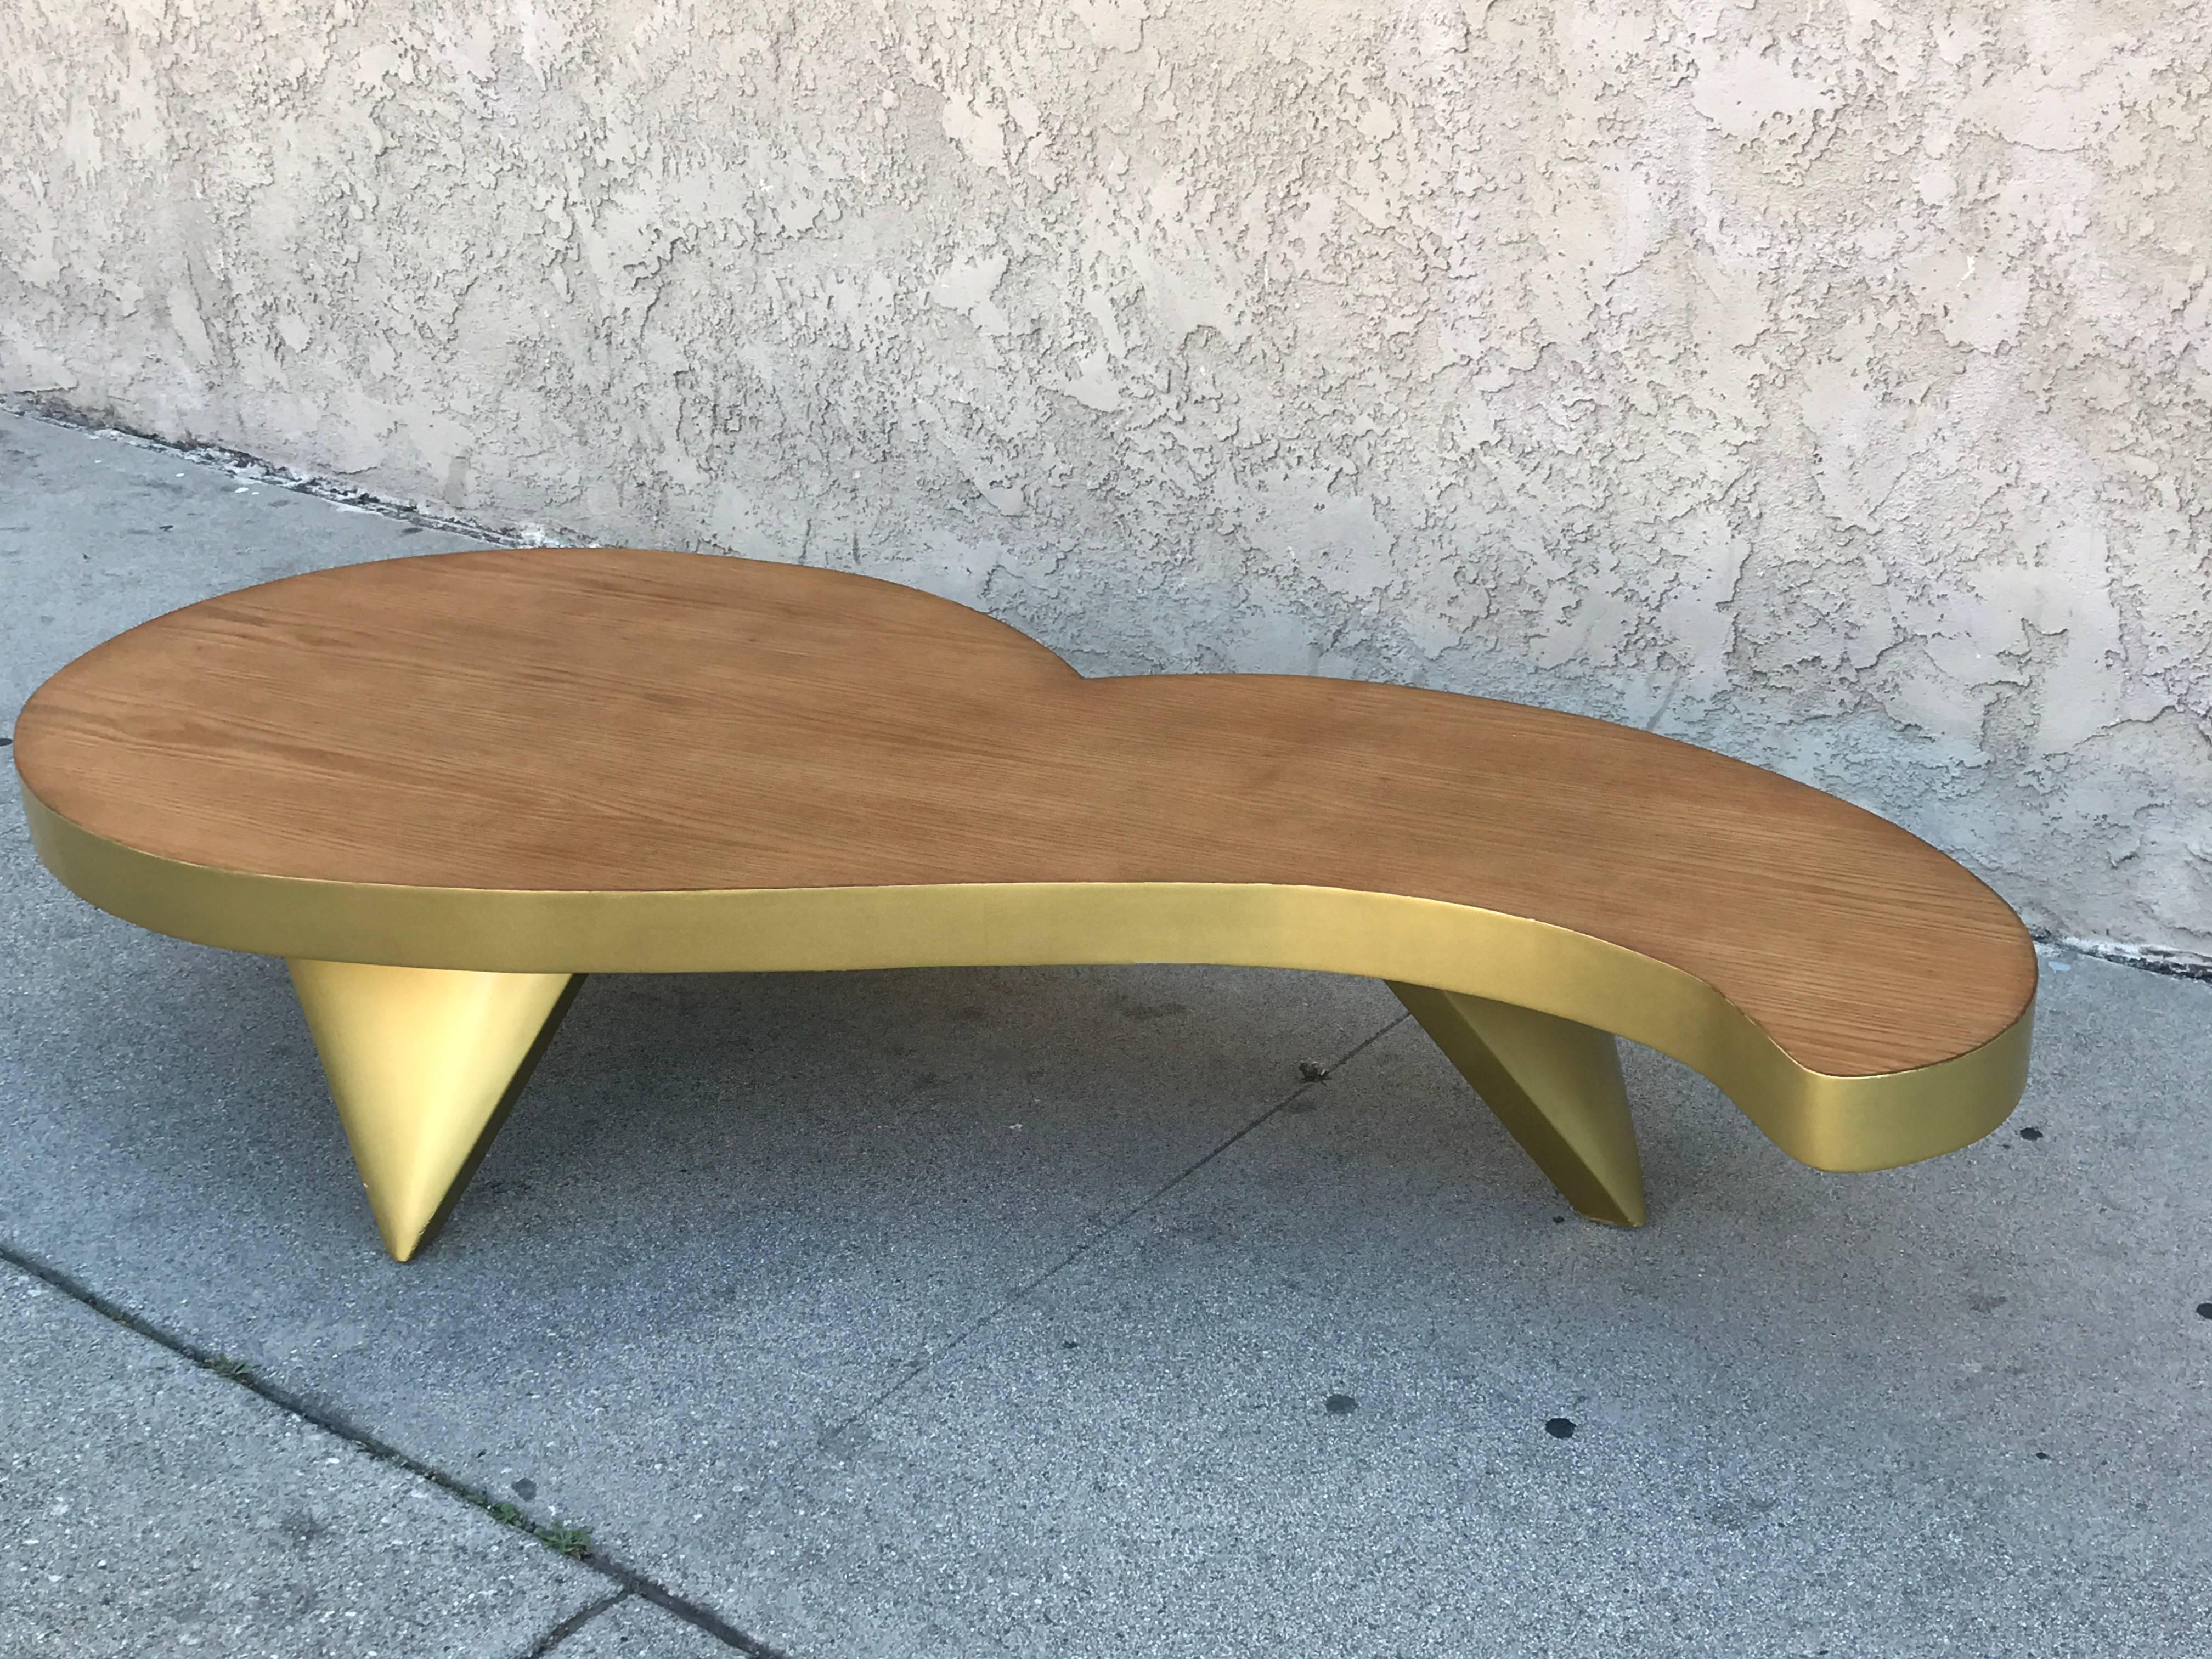 Late 20th Century Unusual and Whimsical Shape 1980s Coffee Table